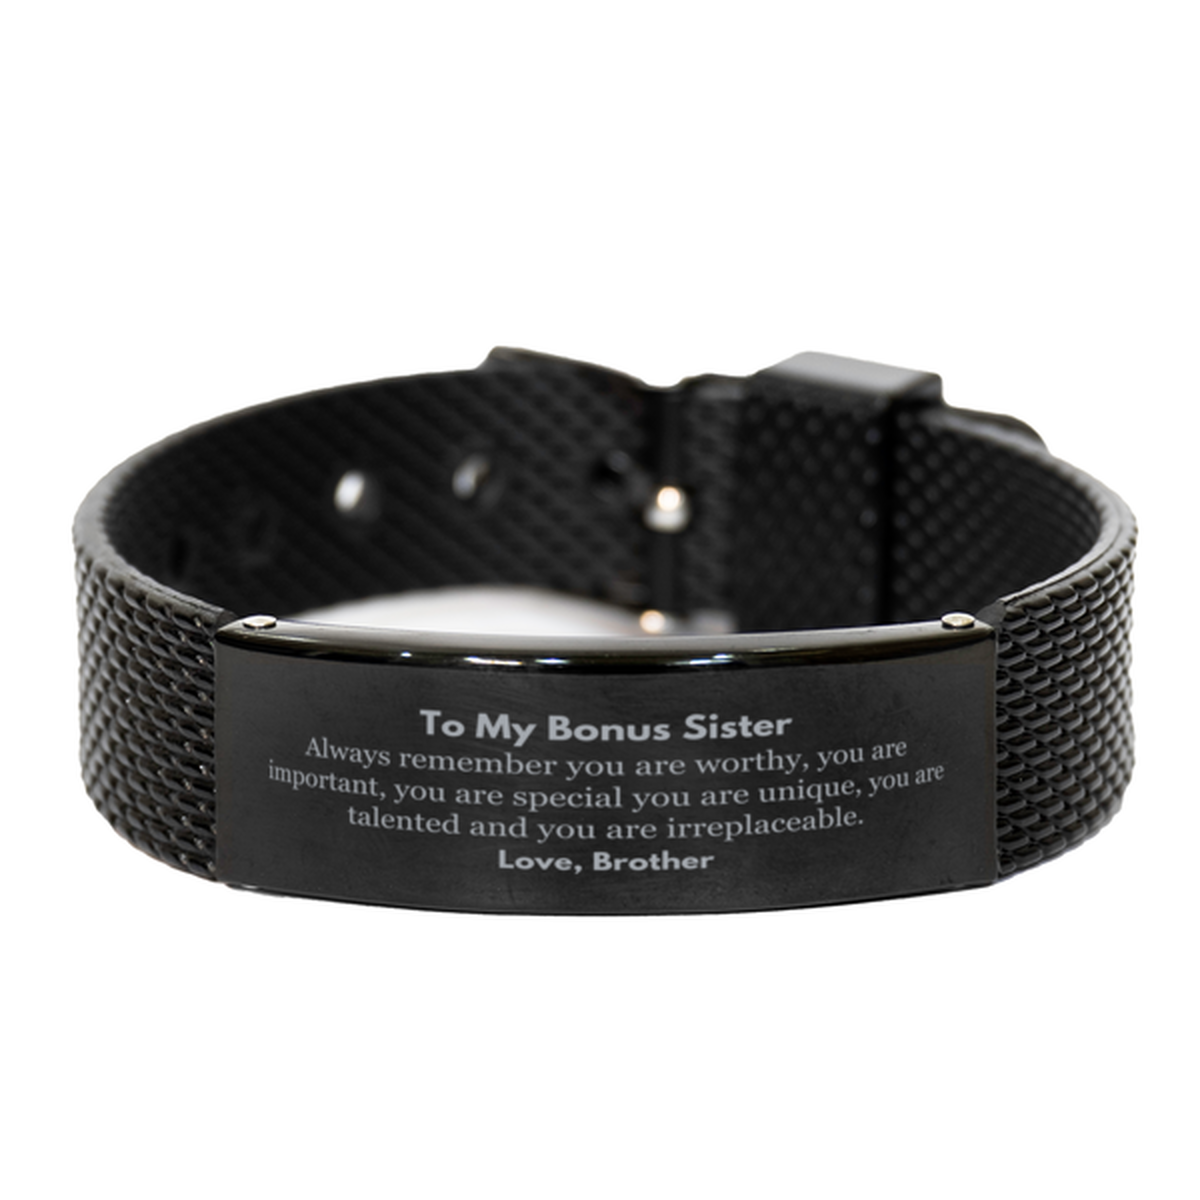 Bonus Sister Birthday Gifts from Brother, Inspirational Black Shark Mesh Bracelet for Bonus Sister Christmas Graduation Gifts for Bonus Sister Always remember you are worthy, you are important. Love, Brother